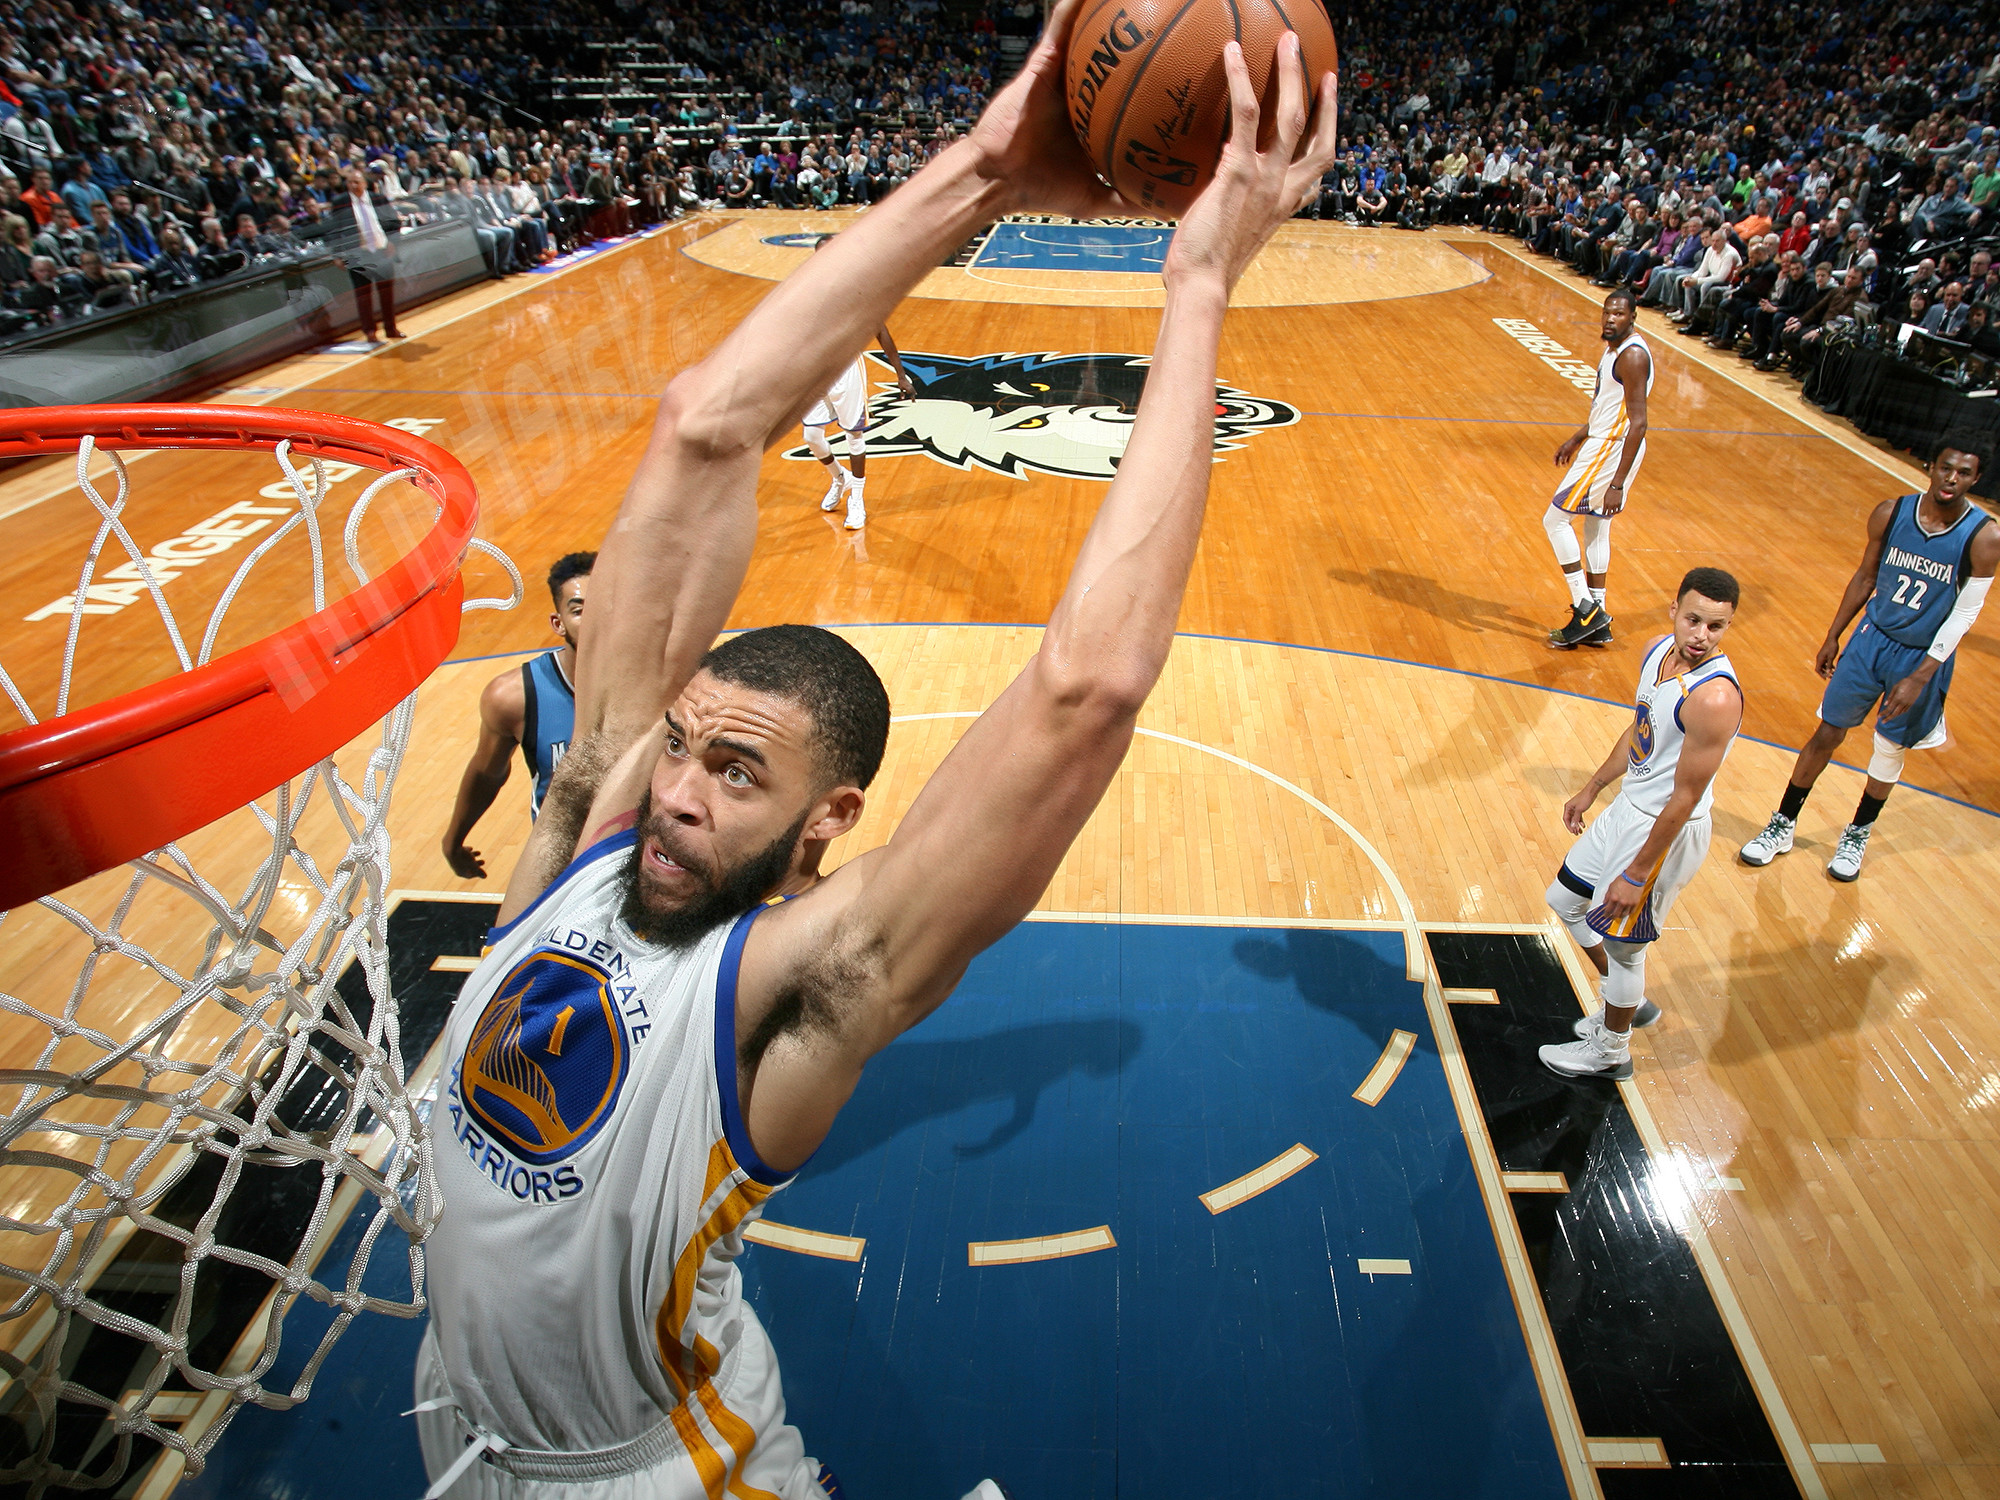 2000x1500 Saved From Shaqtin': JaVale McGee Resurrecting Career With Warriors